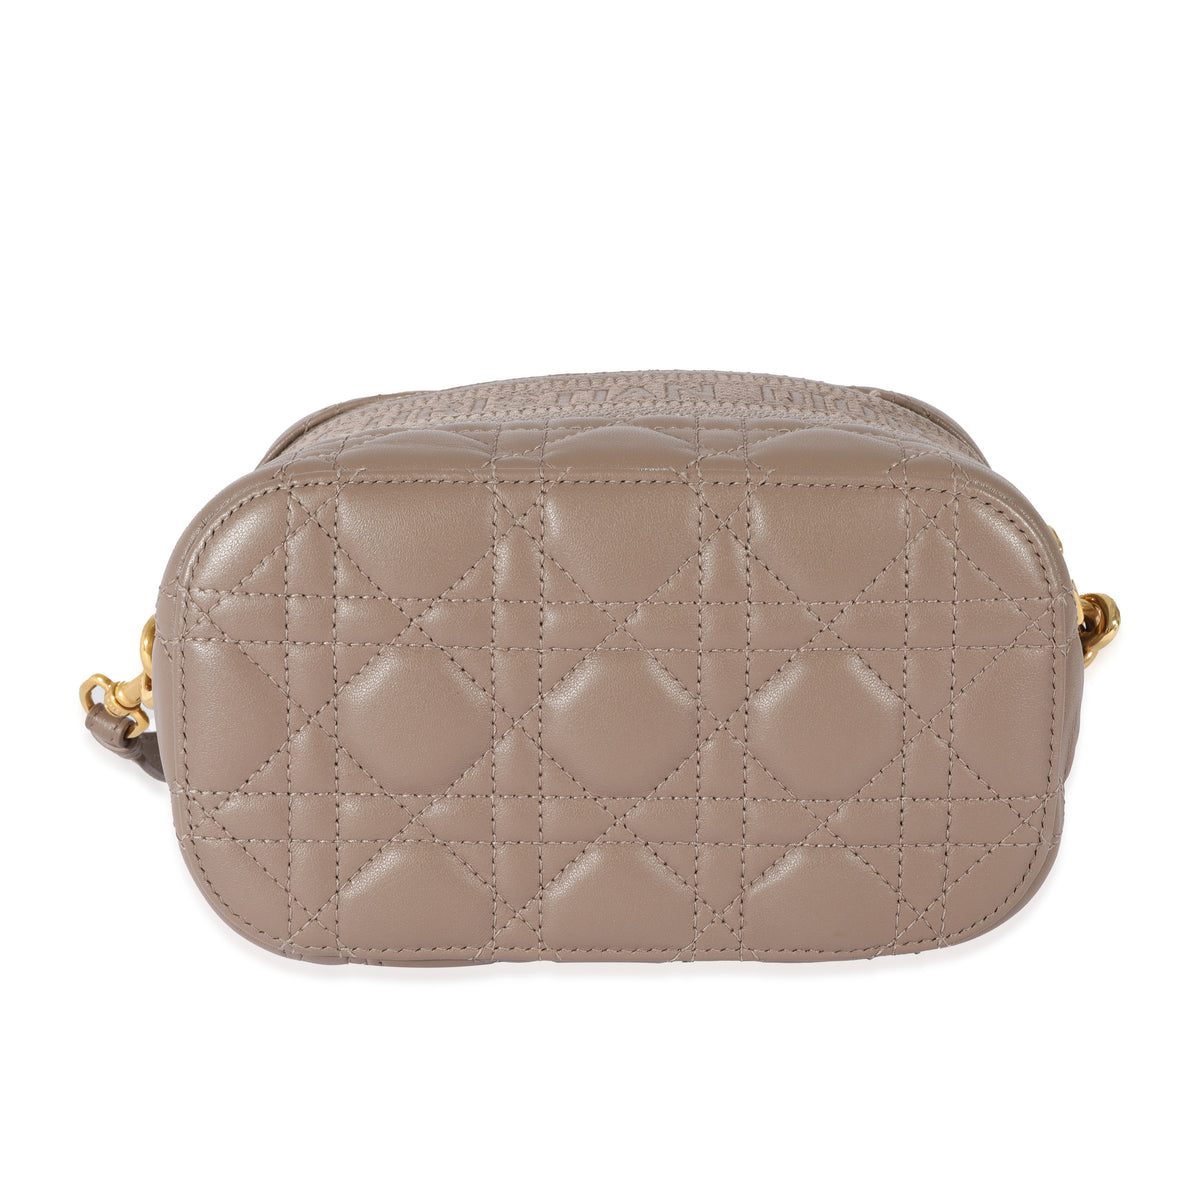 Christian Dior Beige Cannage Lambskin Small Diortravel Vanity Case